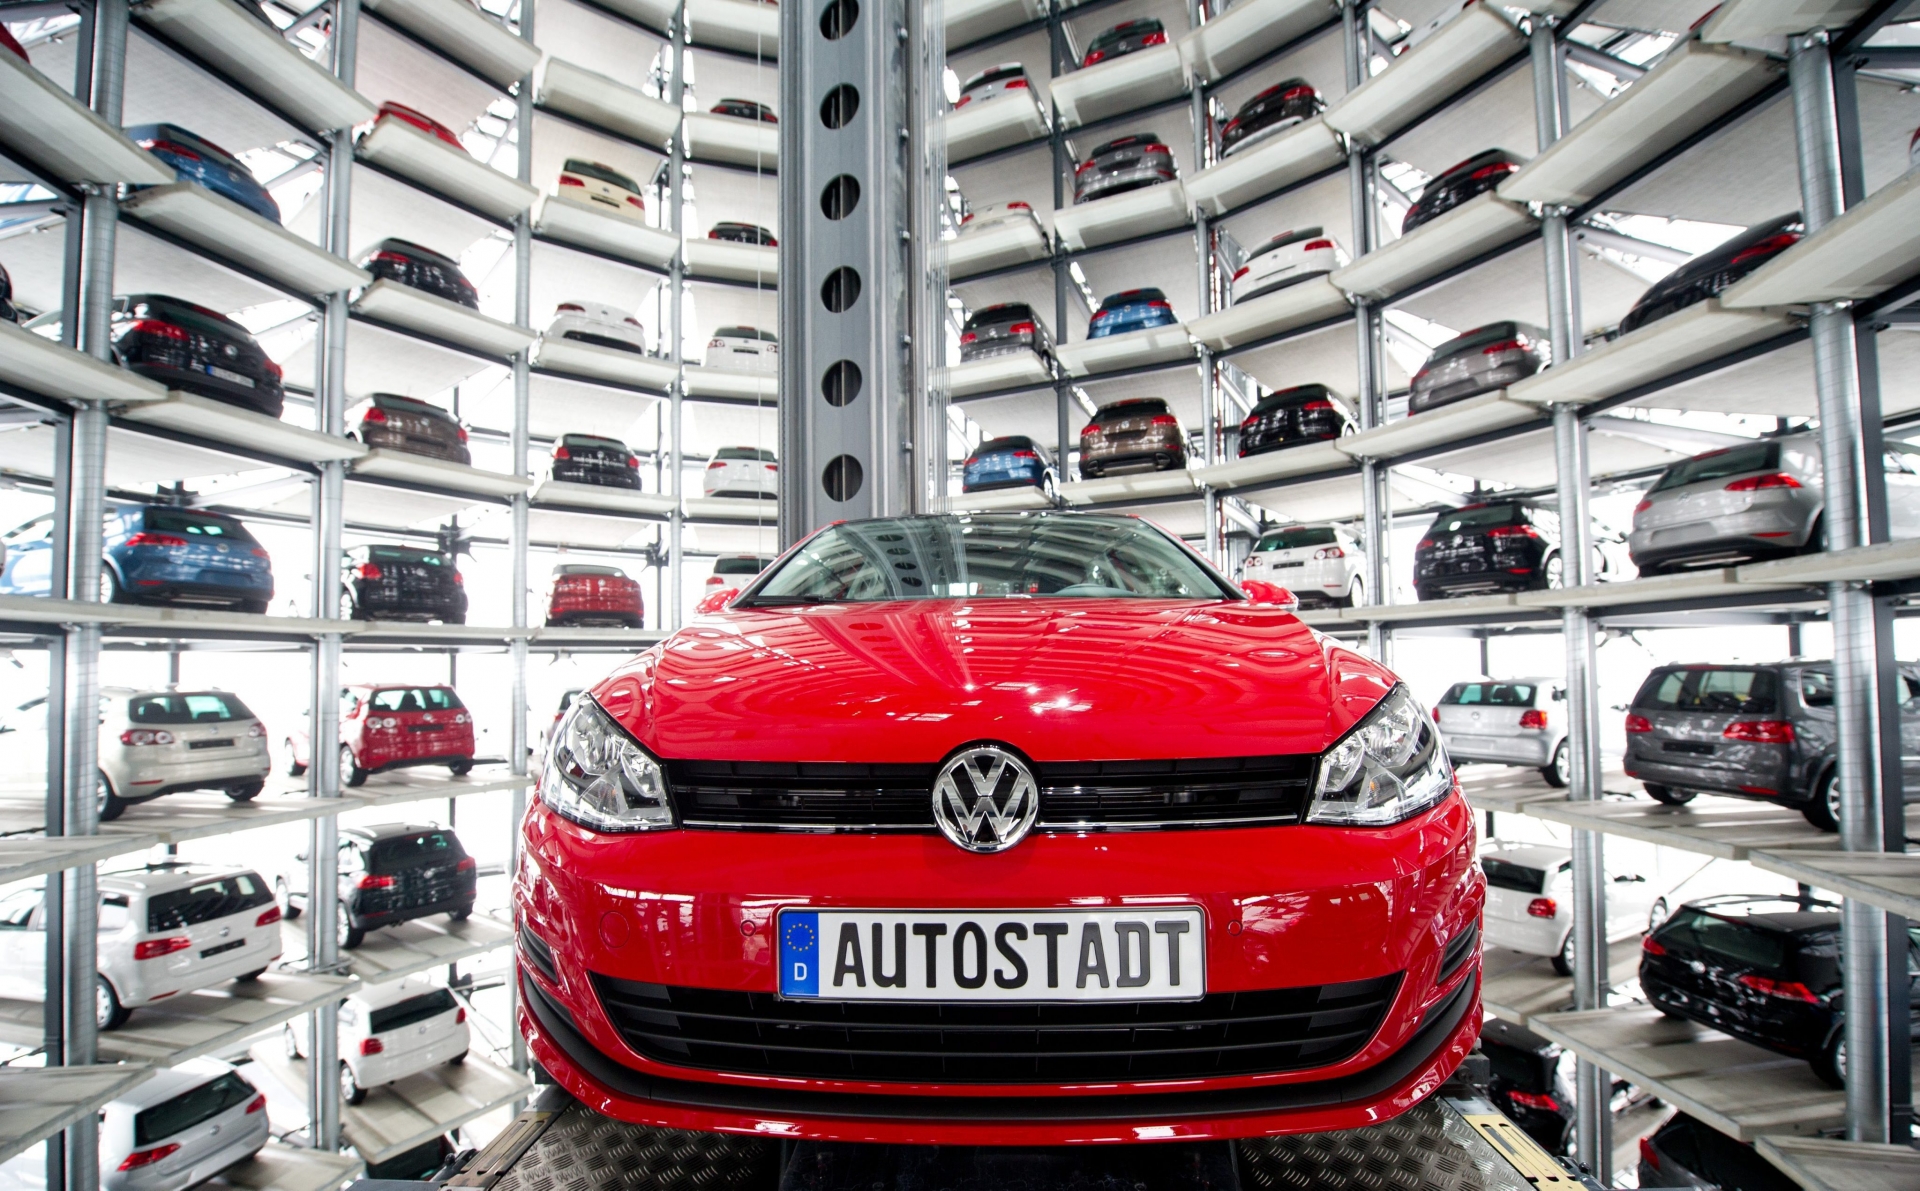 epa05761257 (FILE) - A file photo dated 14 March 2013 shows a Volkswagen Golf VII being picked by an automatic elevator to be transported out of the glass silo, which is used as storage for new VW cars in the Autostadt (Autocity )in Wolfsburg, Germany. Reports on 30 January 2017 state Volkswagen has taken over from Toyota as the world's biggest car maker. According to reports, Volkswagen sold 10.3 million vehicles, compared with Toyota's 10.175 million cars that was 0.2 more than in 2016. Volkswagen earlier in January said their annual sales in 2016 increased by 3.8 per cent.  EPA/SEBASTIAN KAHNERT  GERMANY OUT (FILE) GERMANY ECONOMY VOLKSWAGEN